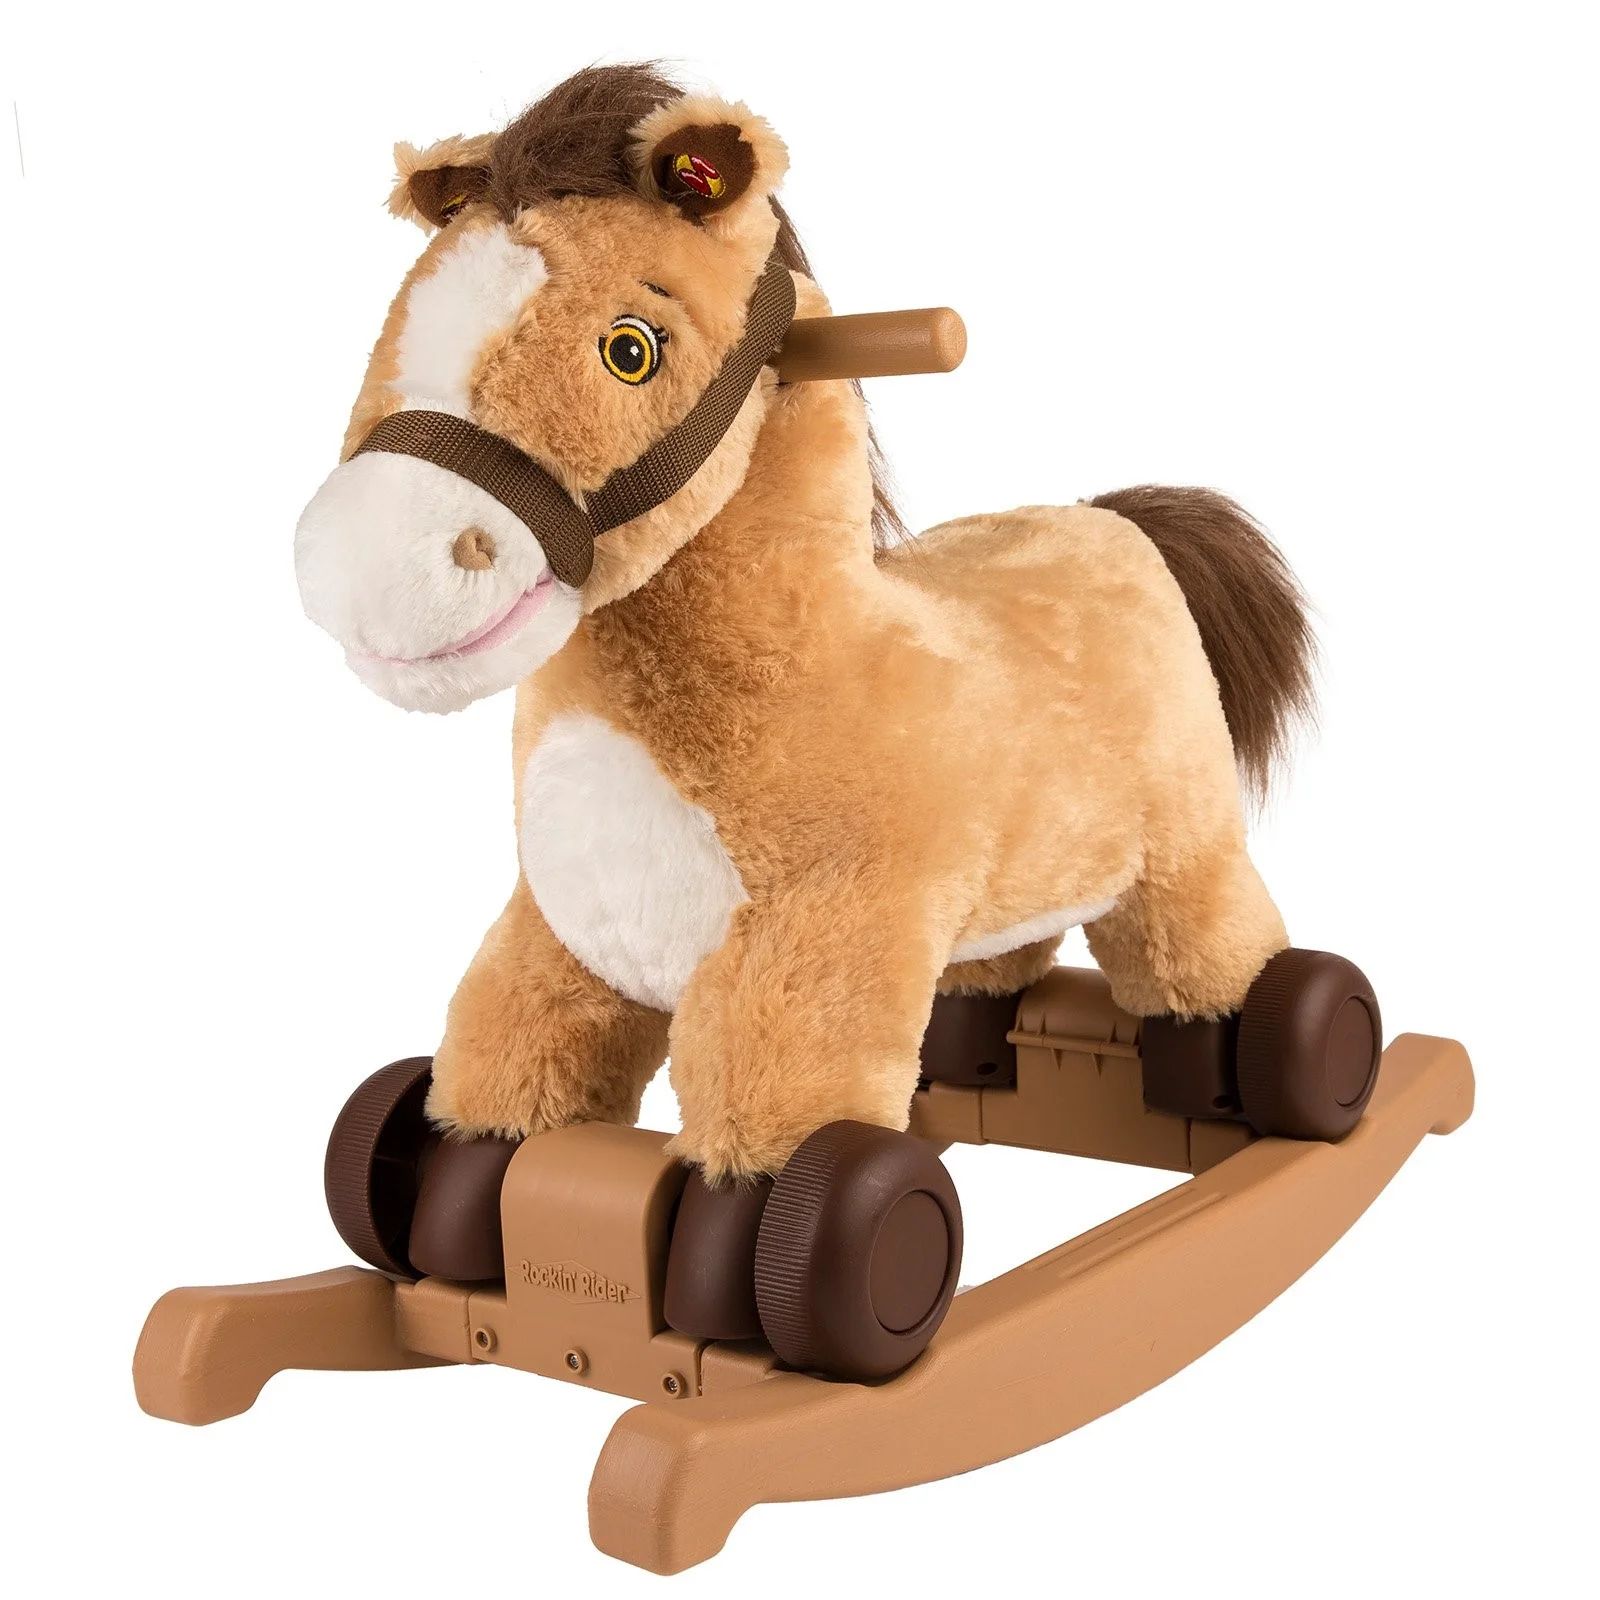 Rockin' rider charger 2-in-1 pony ride-on | Walmart (US)